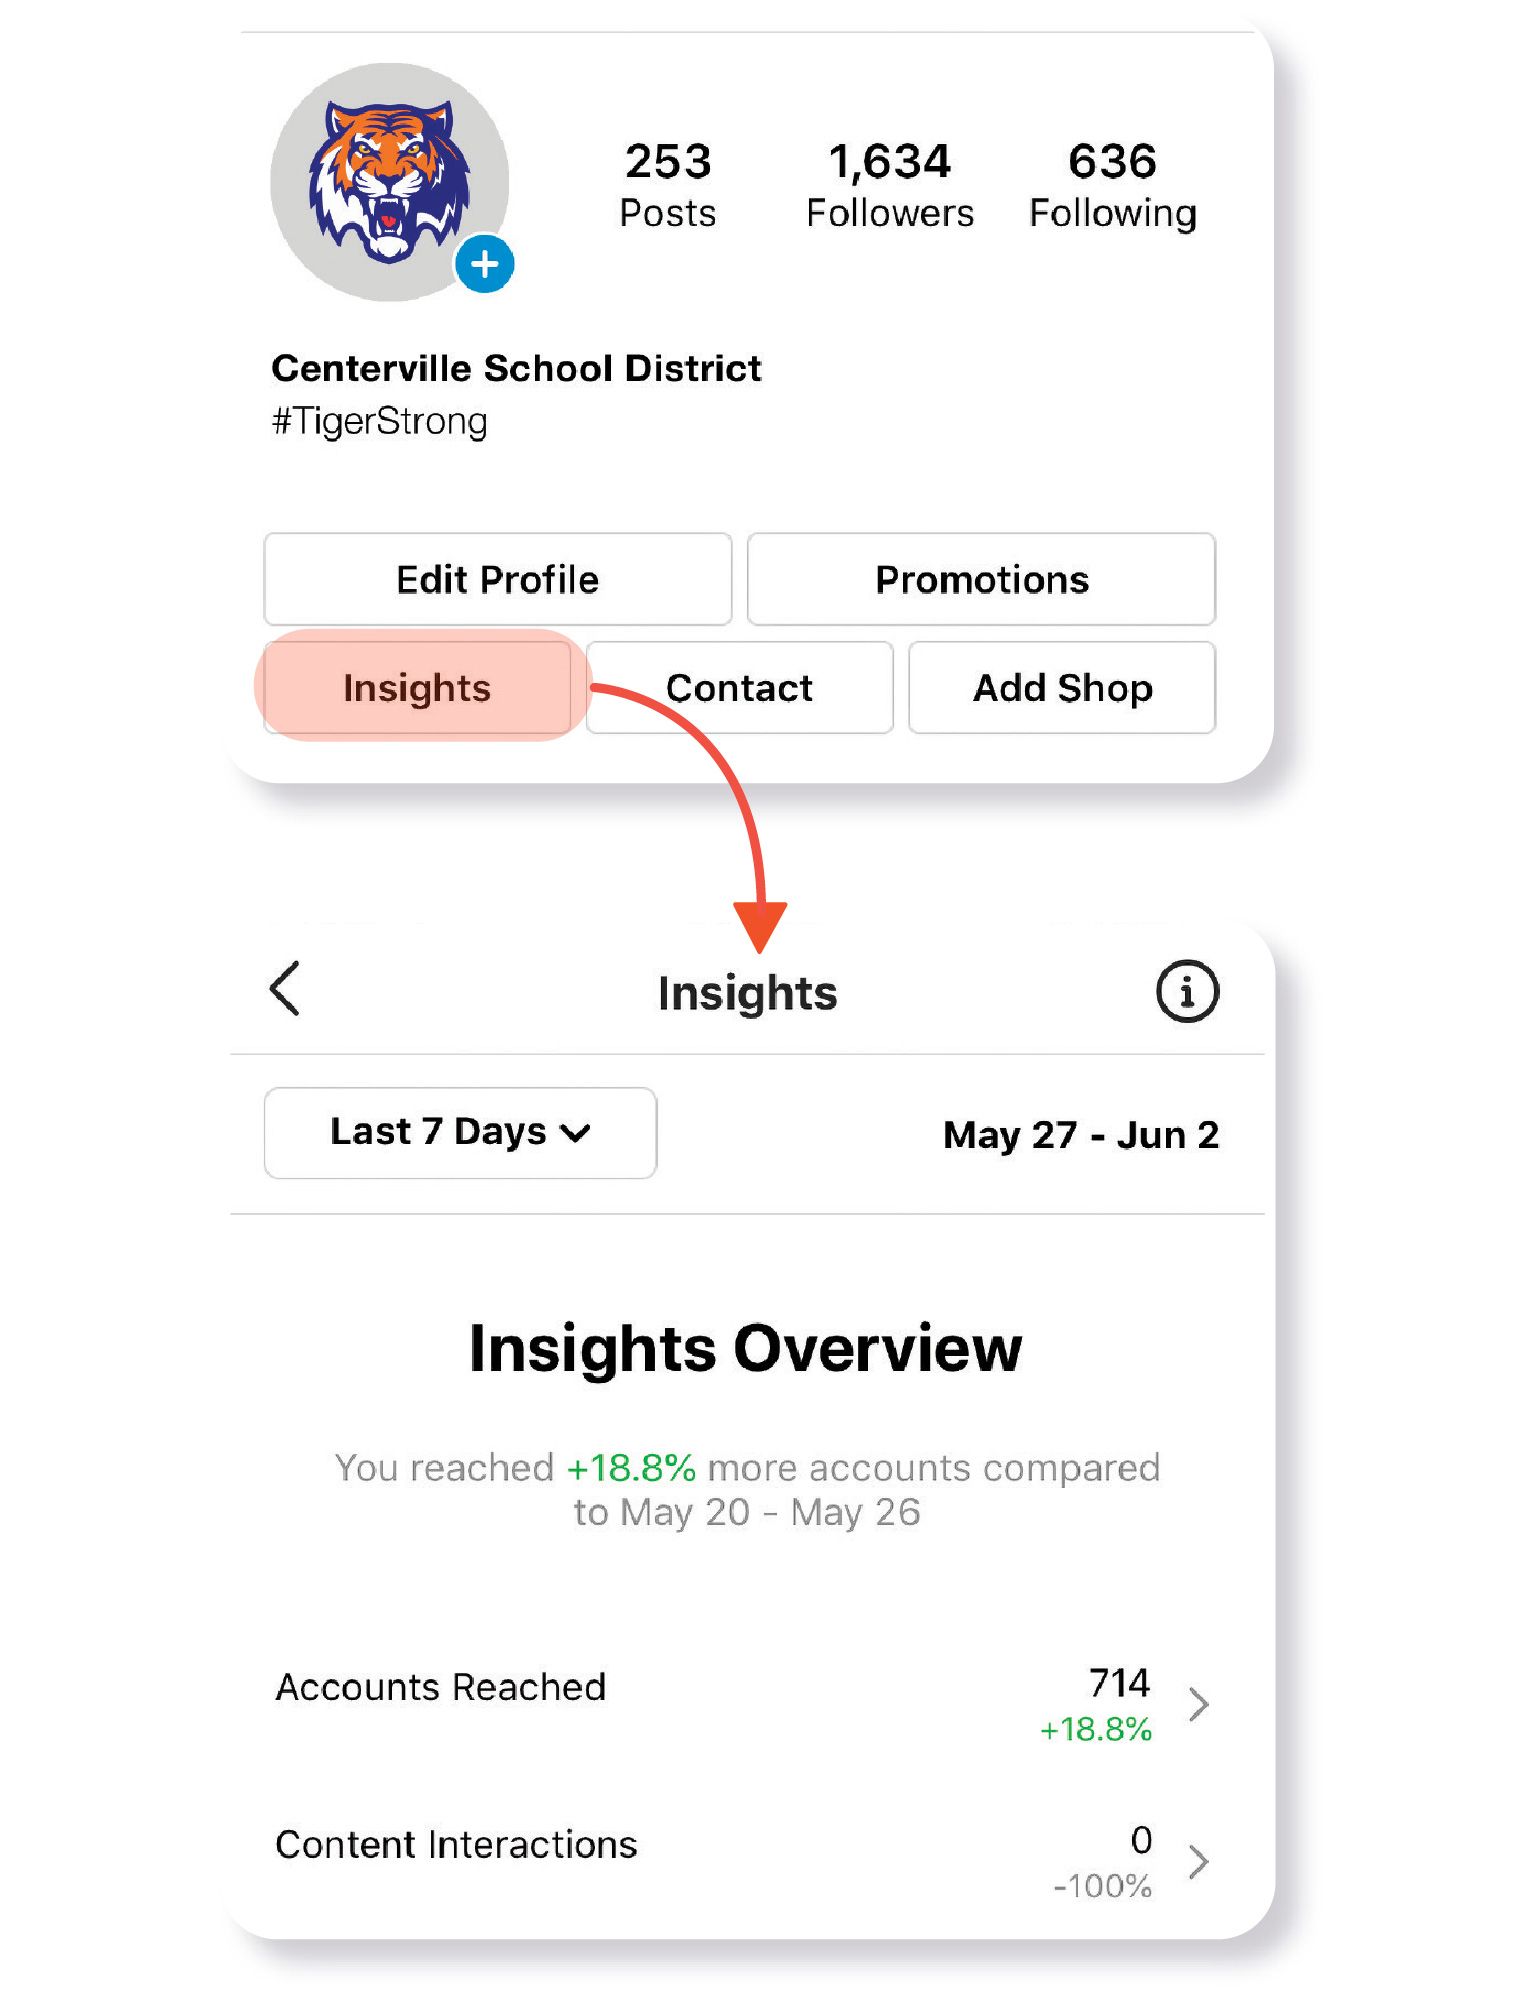 Image: A screenshot showing how to access account-level metrics on Instagram. For a Business account, the Insights button on the profile view reveals data such as number of accounts reached across various time frames.